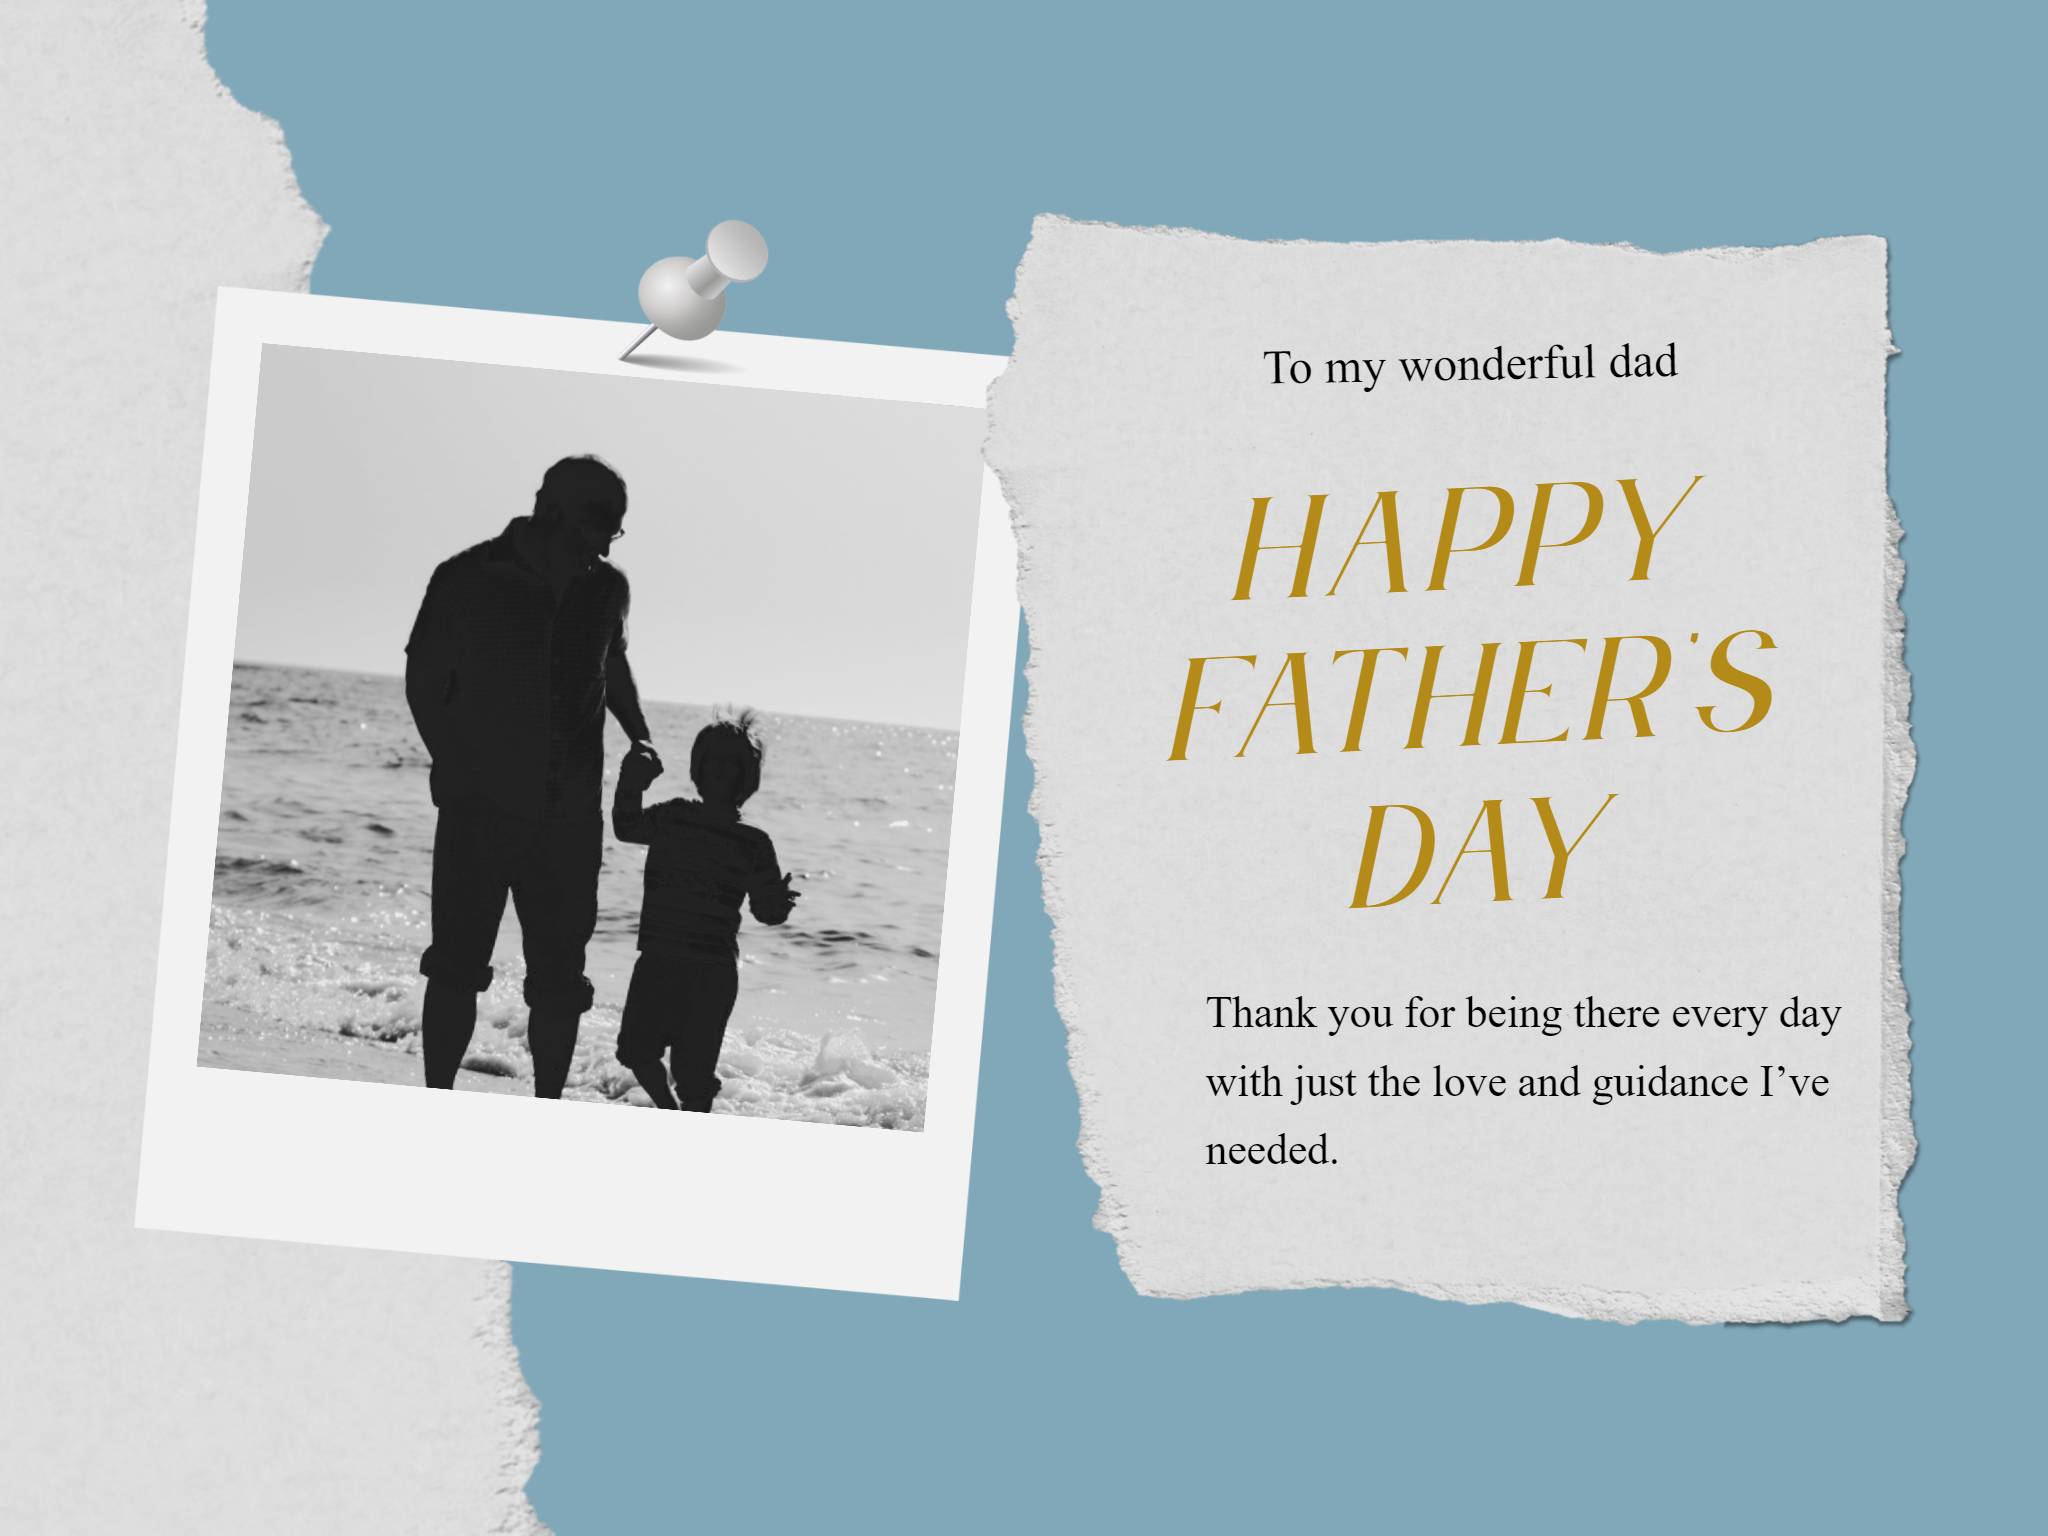 happy fathers day message card template of dad and son silhouette